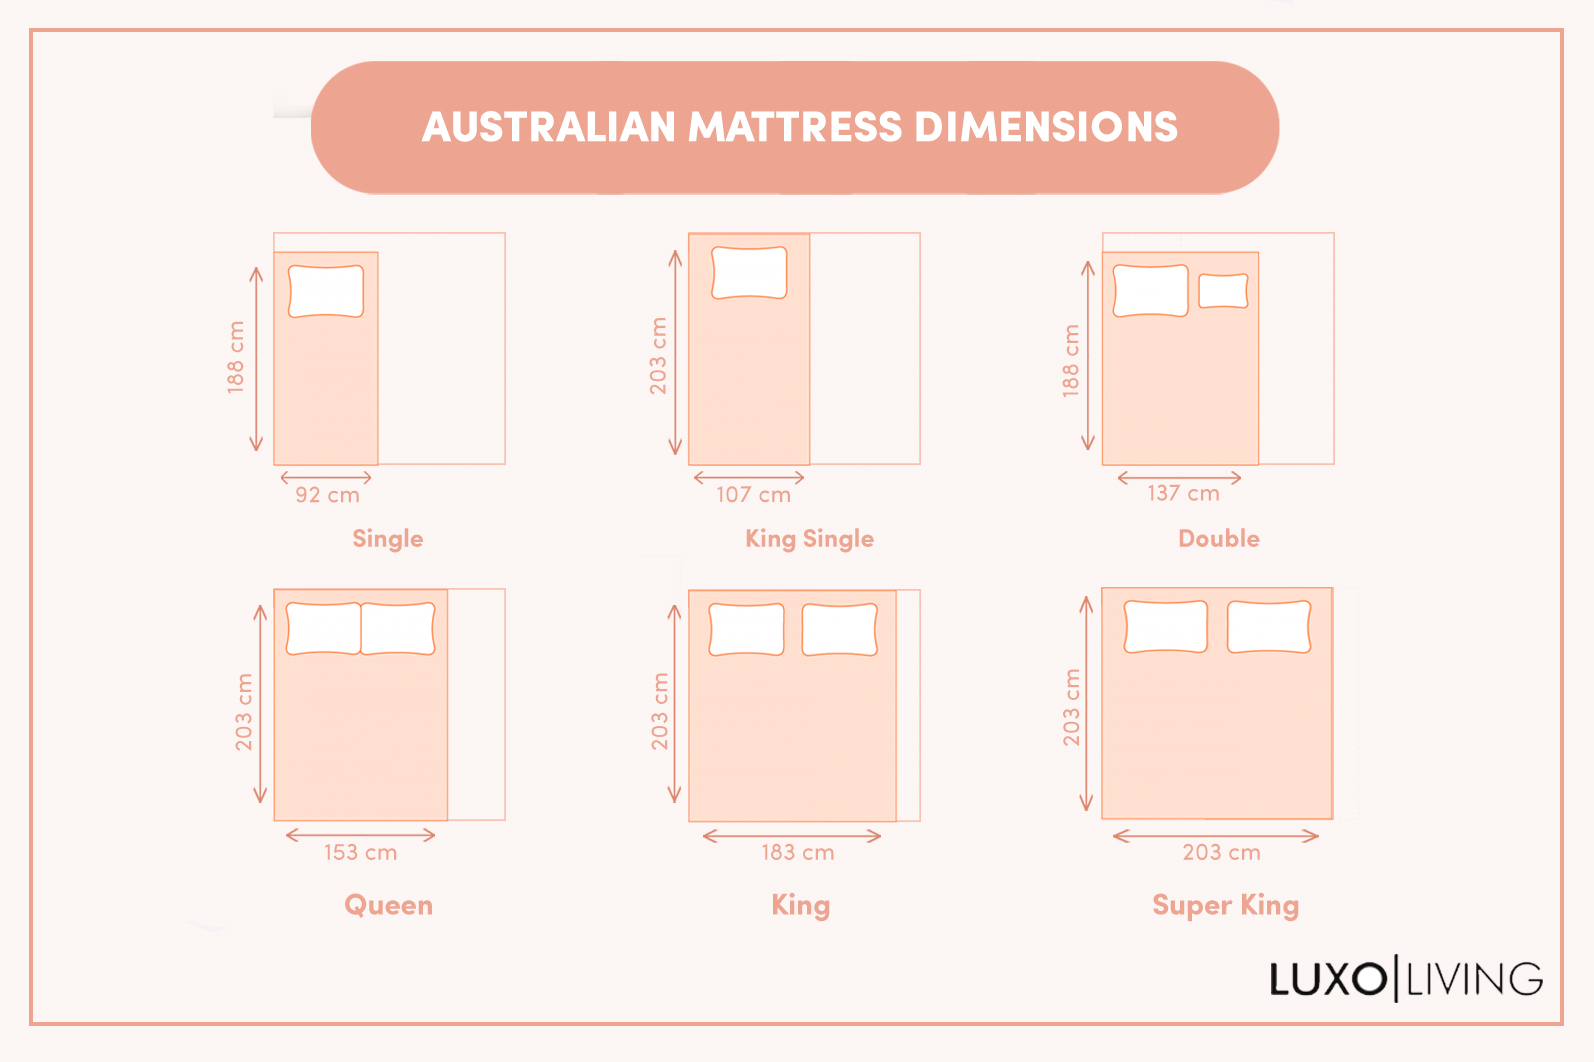 Bed Size Guide Australian Standard, What Size Is King Bed In Cm